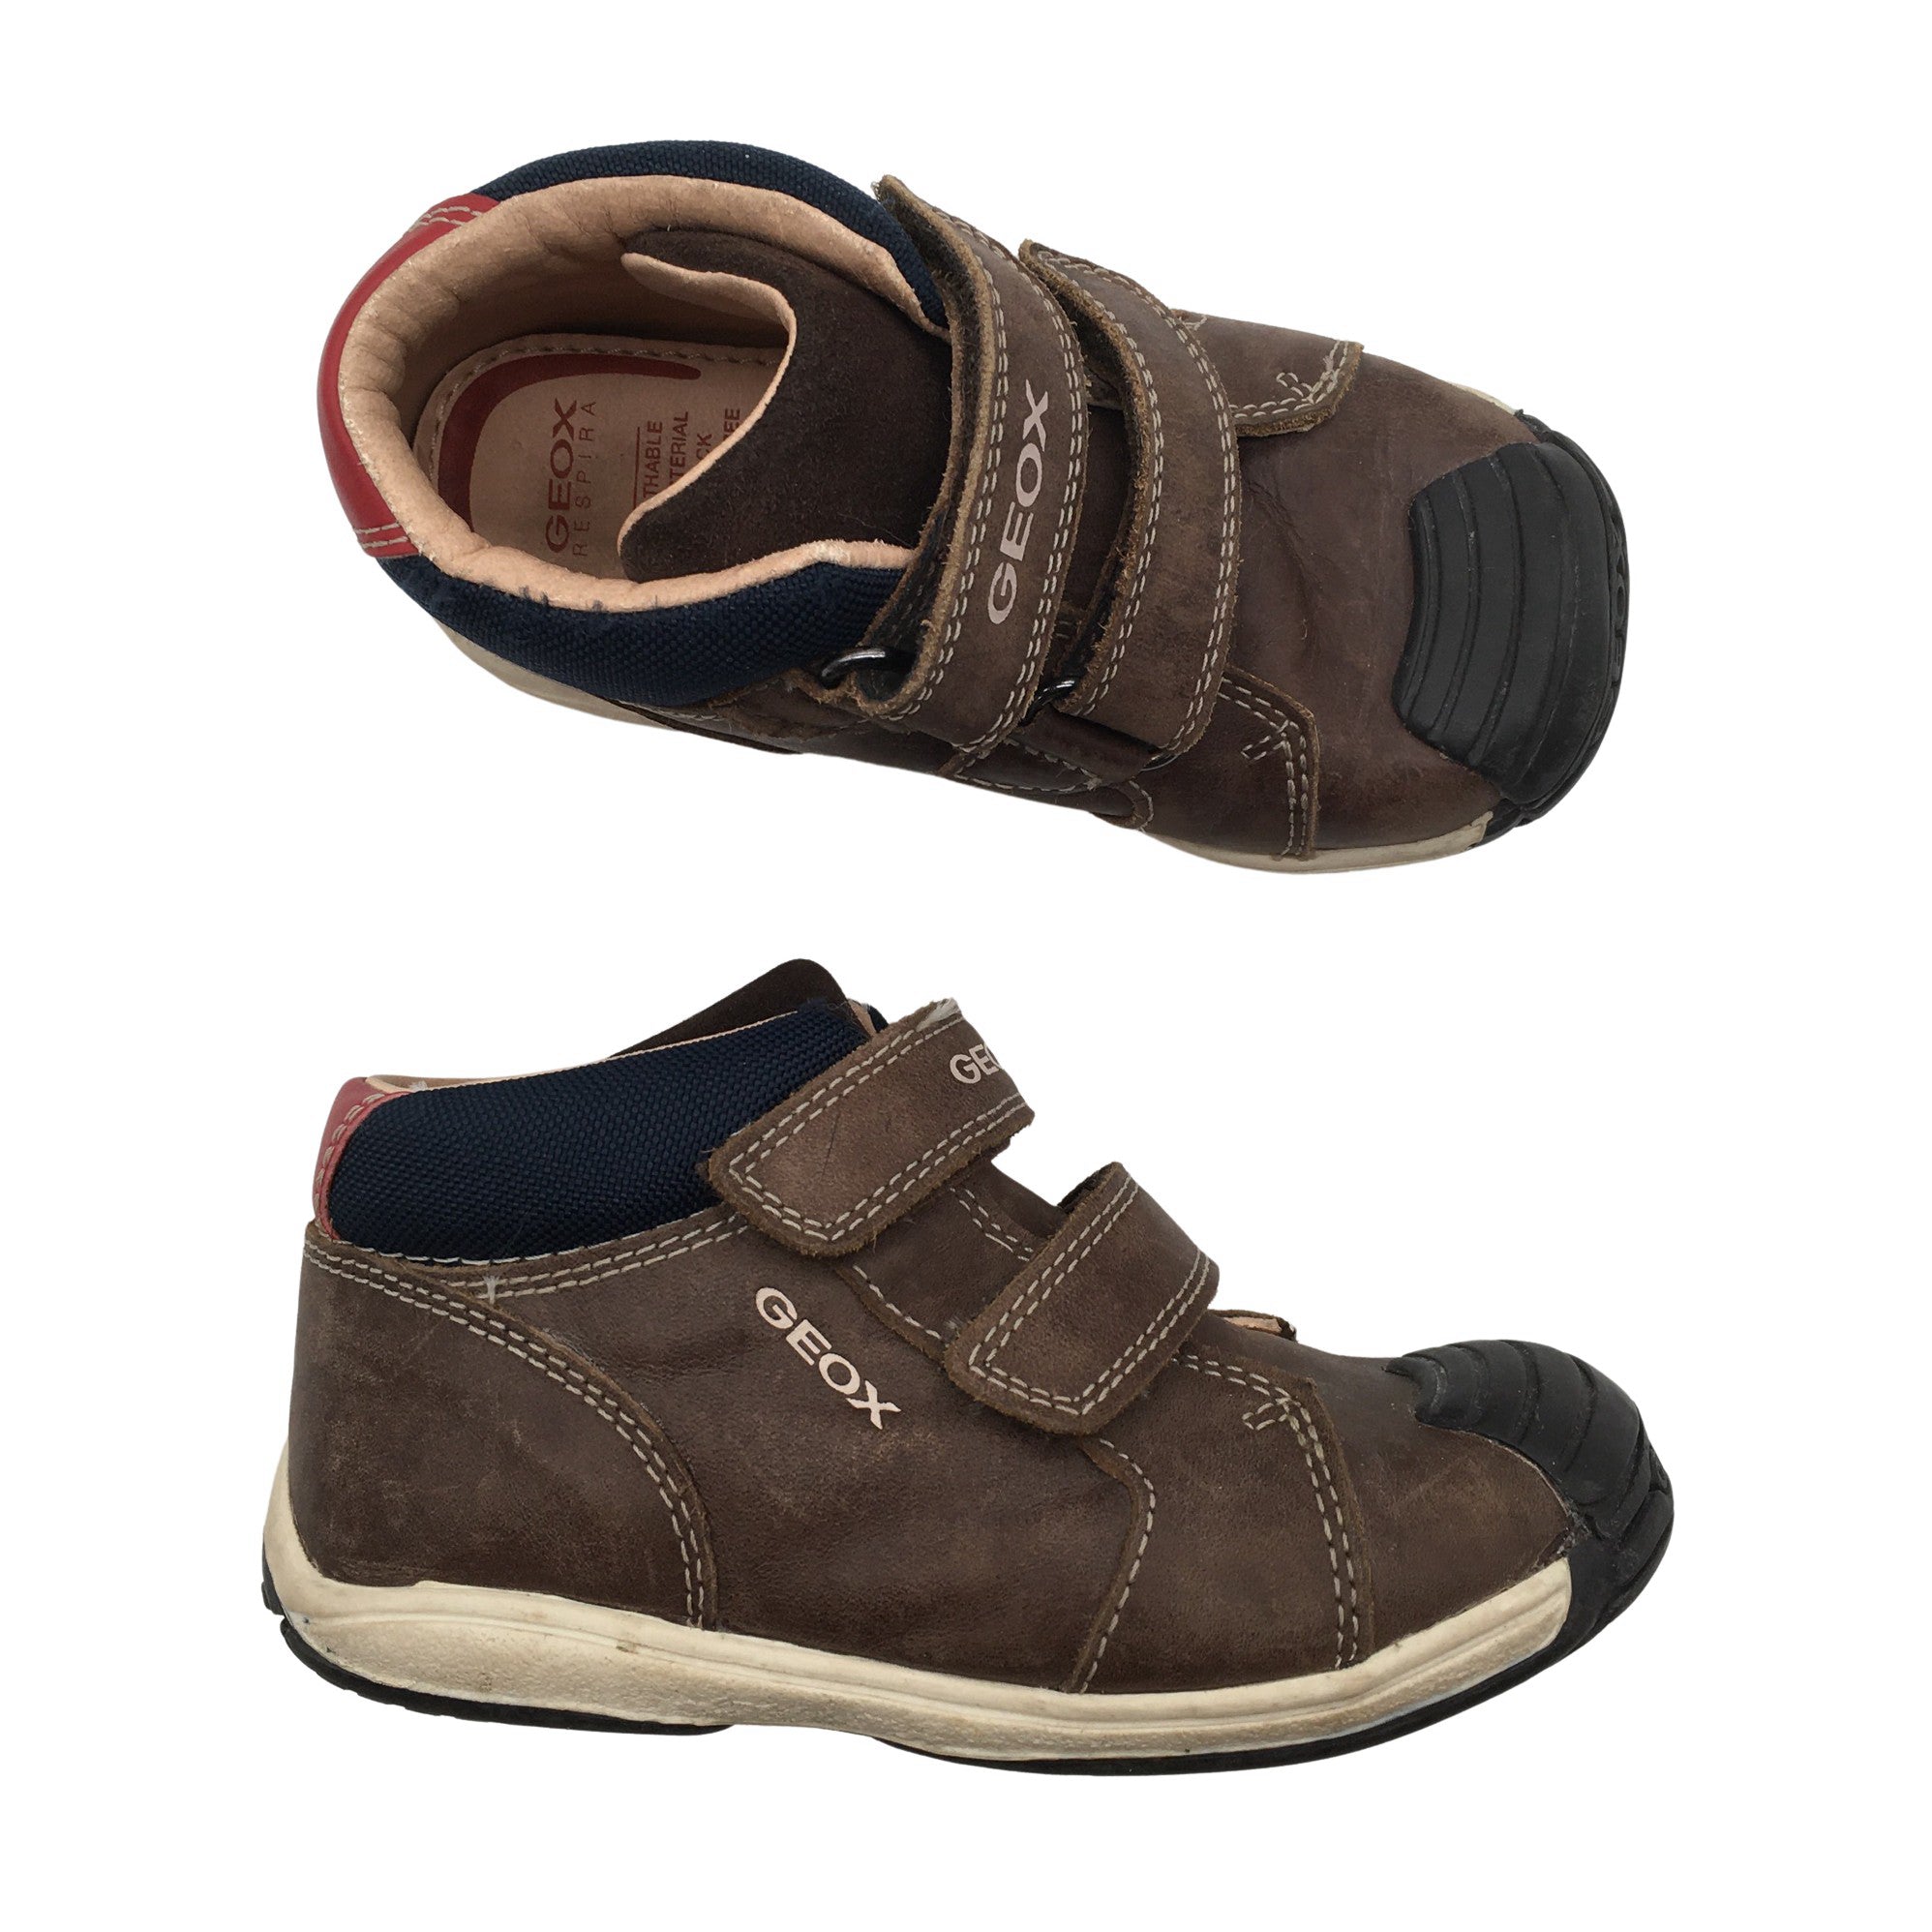 Geox Walking shoes, size 25 (Brown) | Emmy